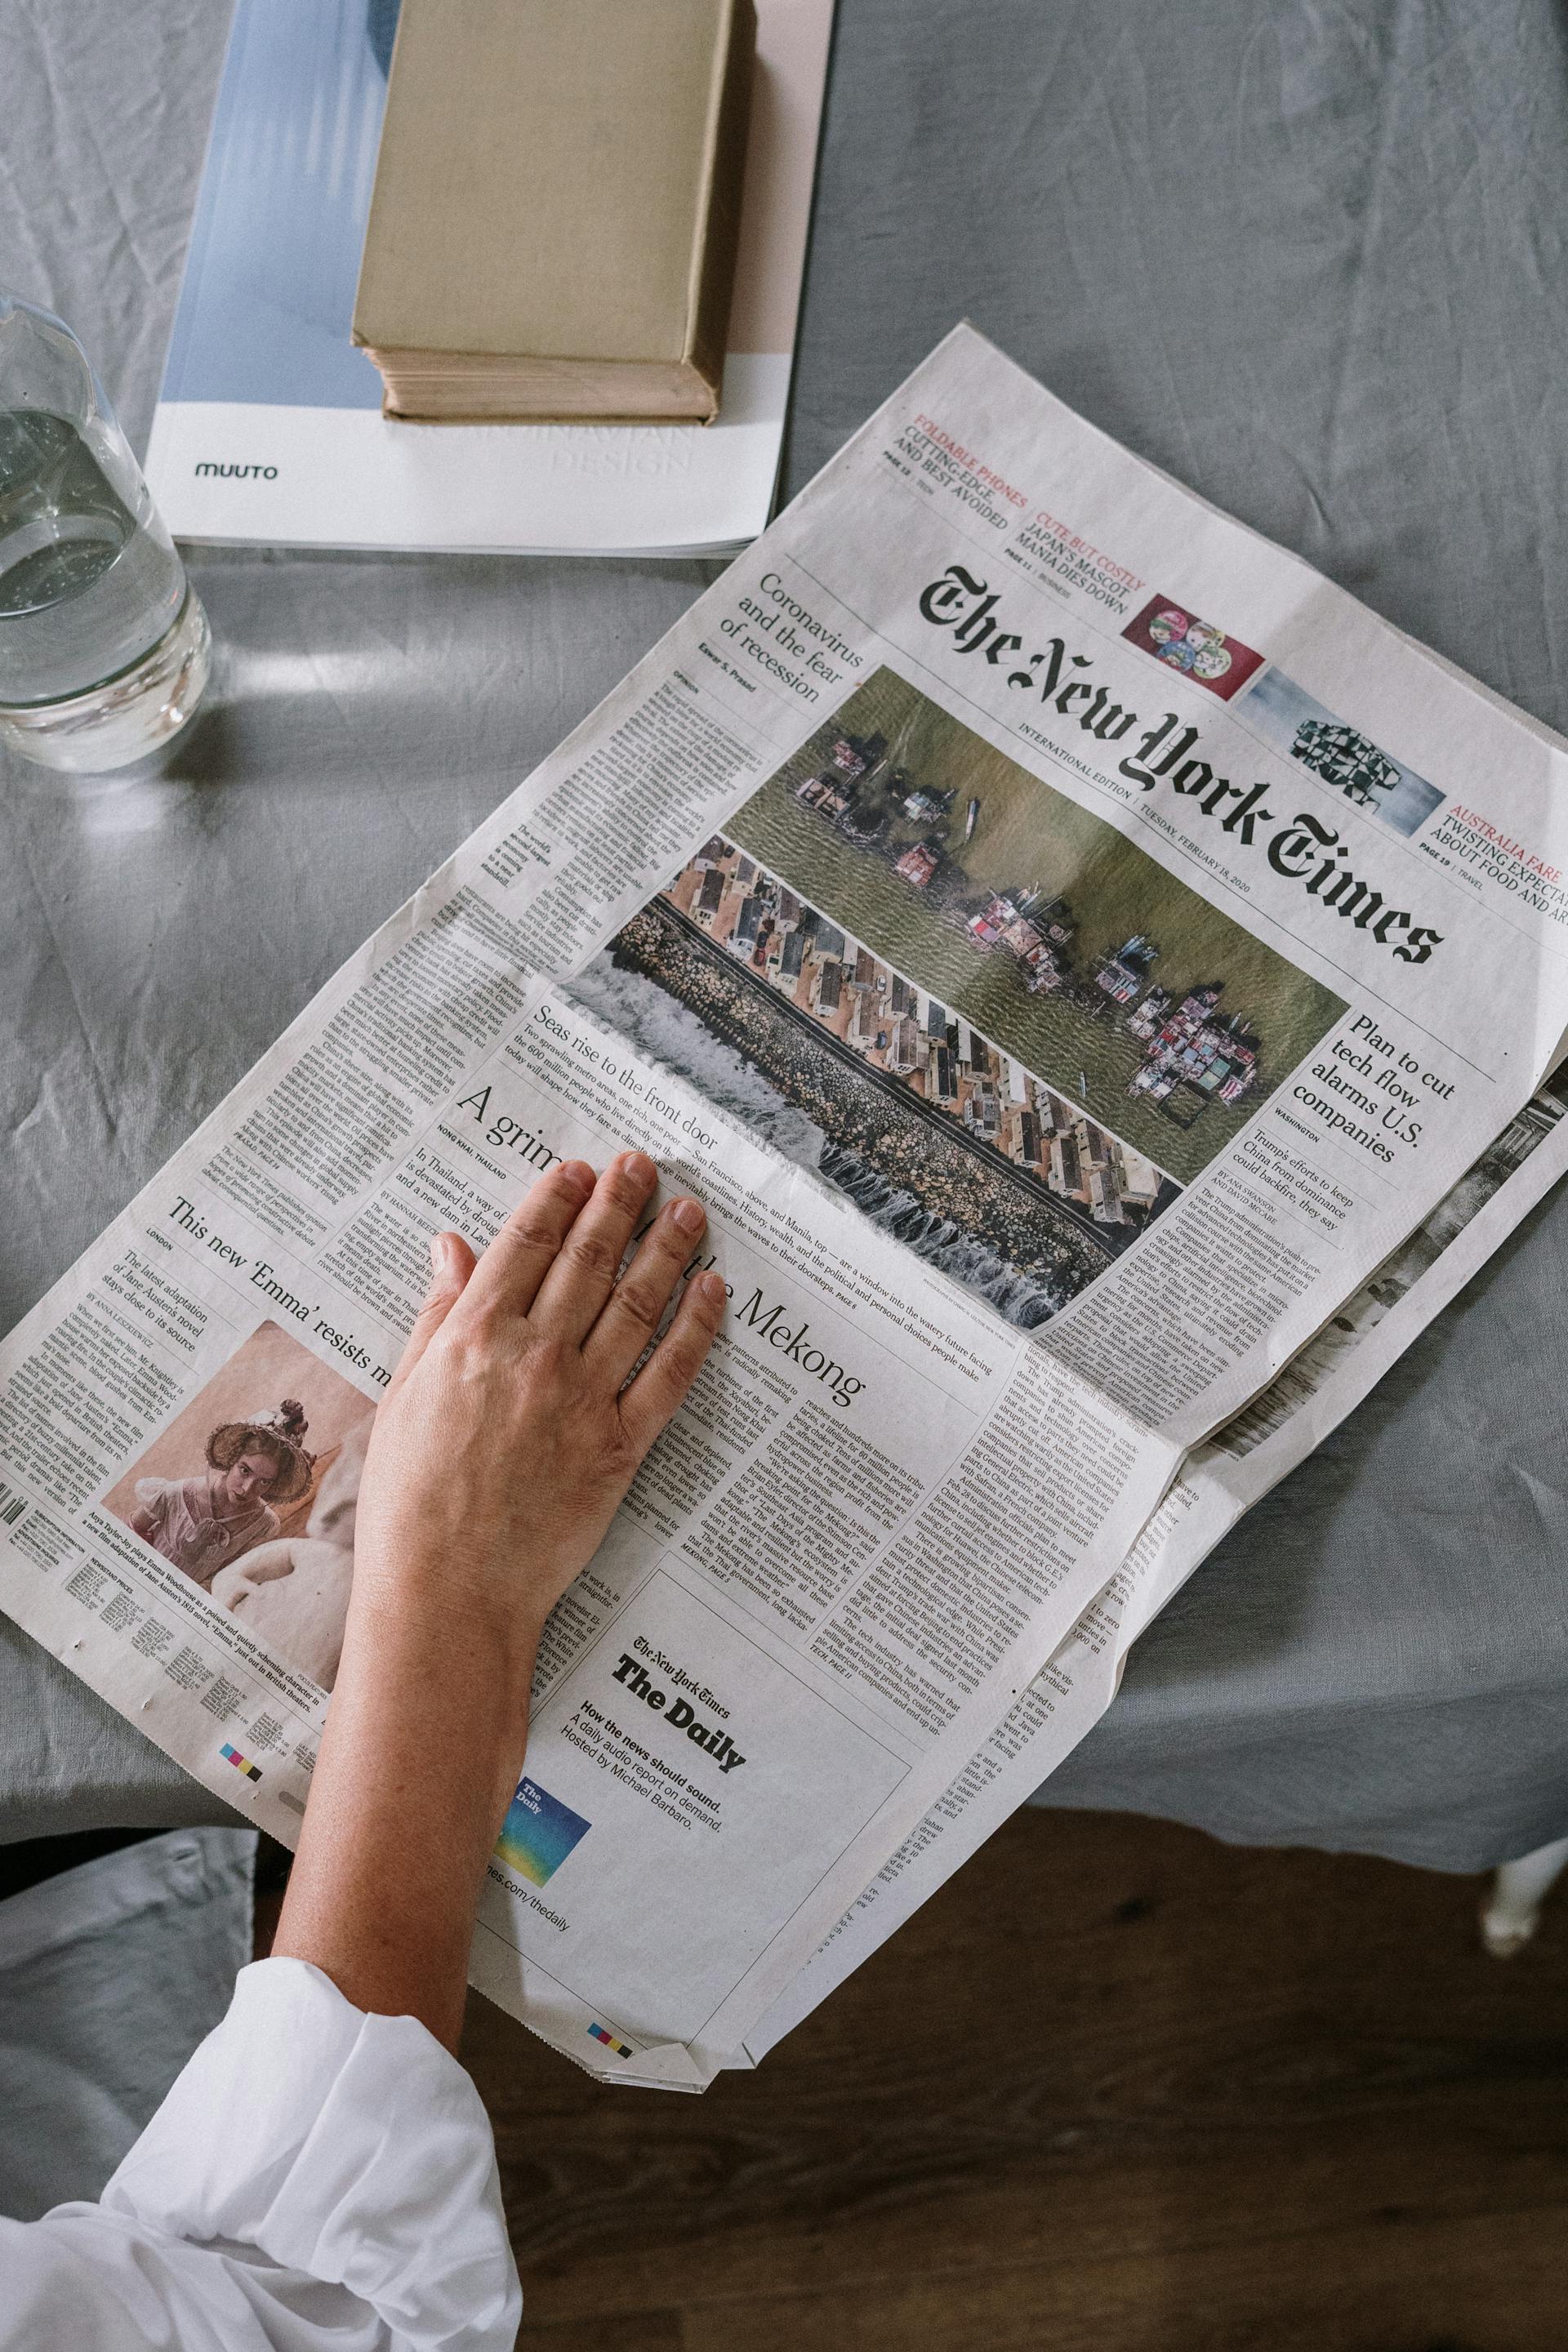 A person reading a newspaper | Source: Pexels